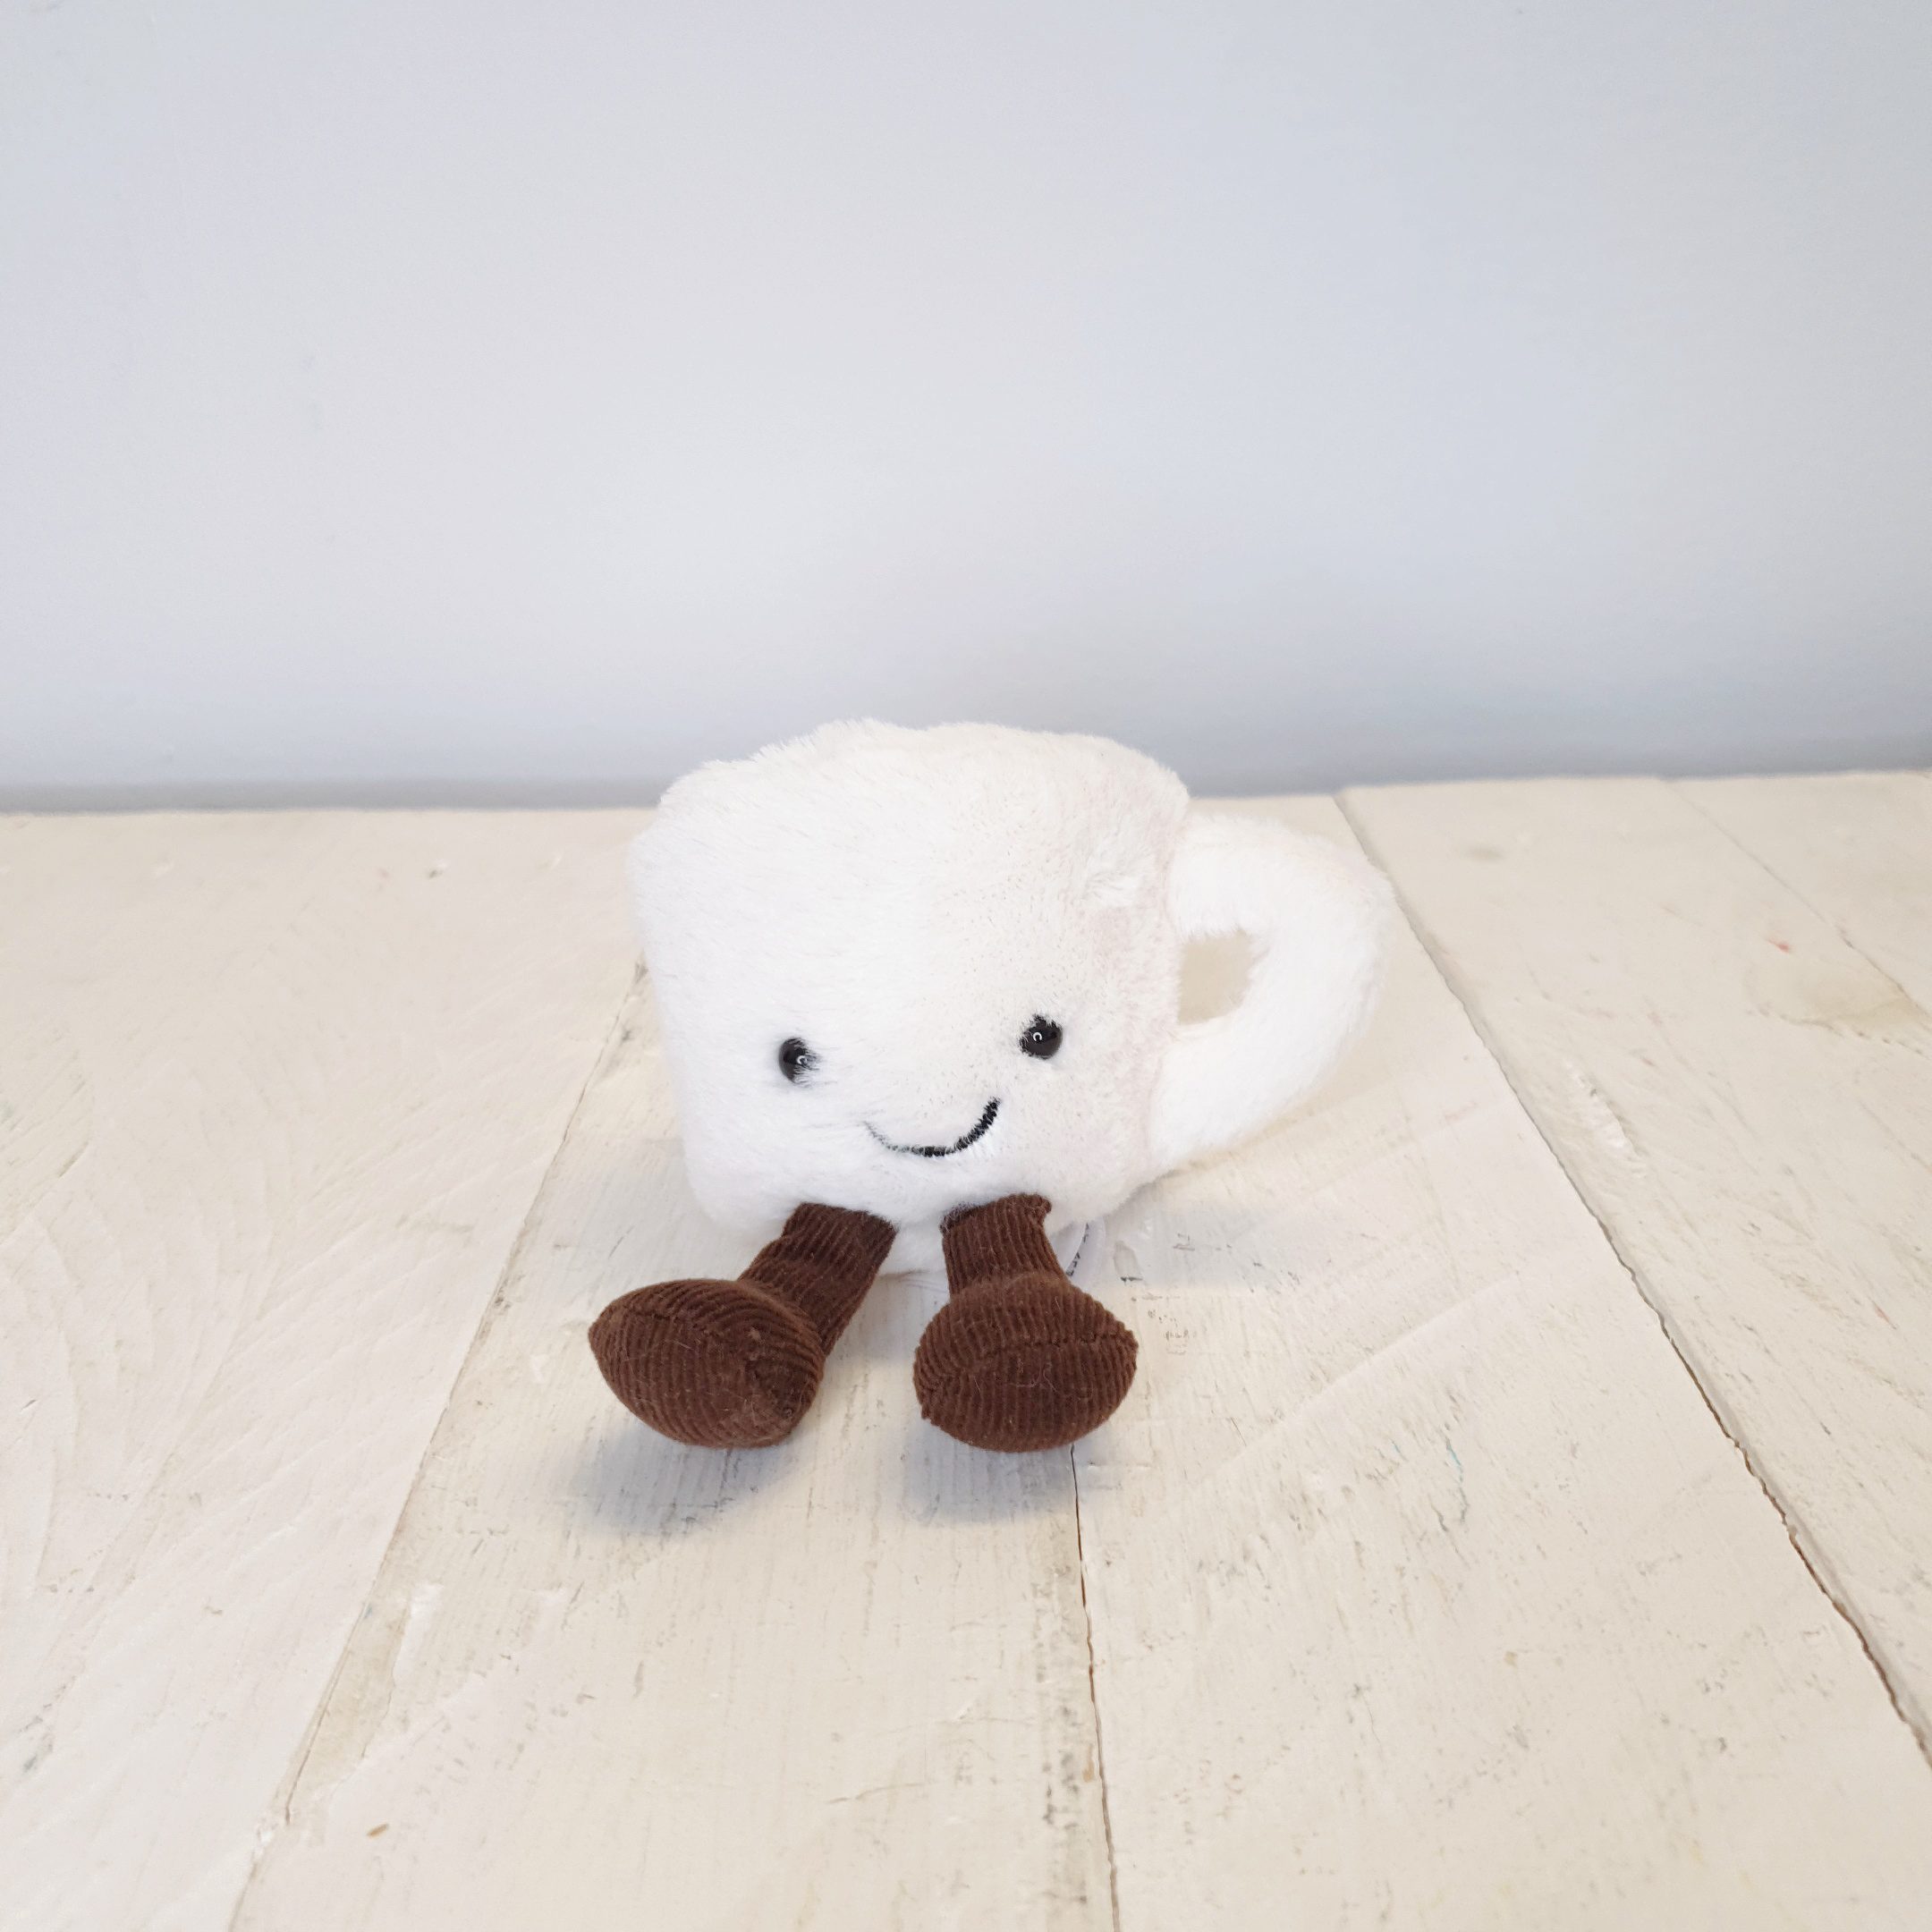 Amuseable Espresso Cup by Jellycat.